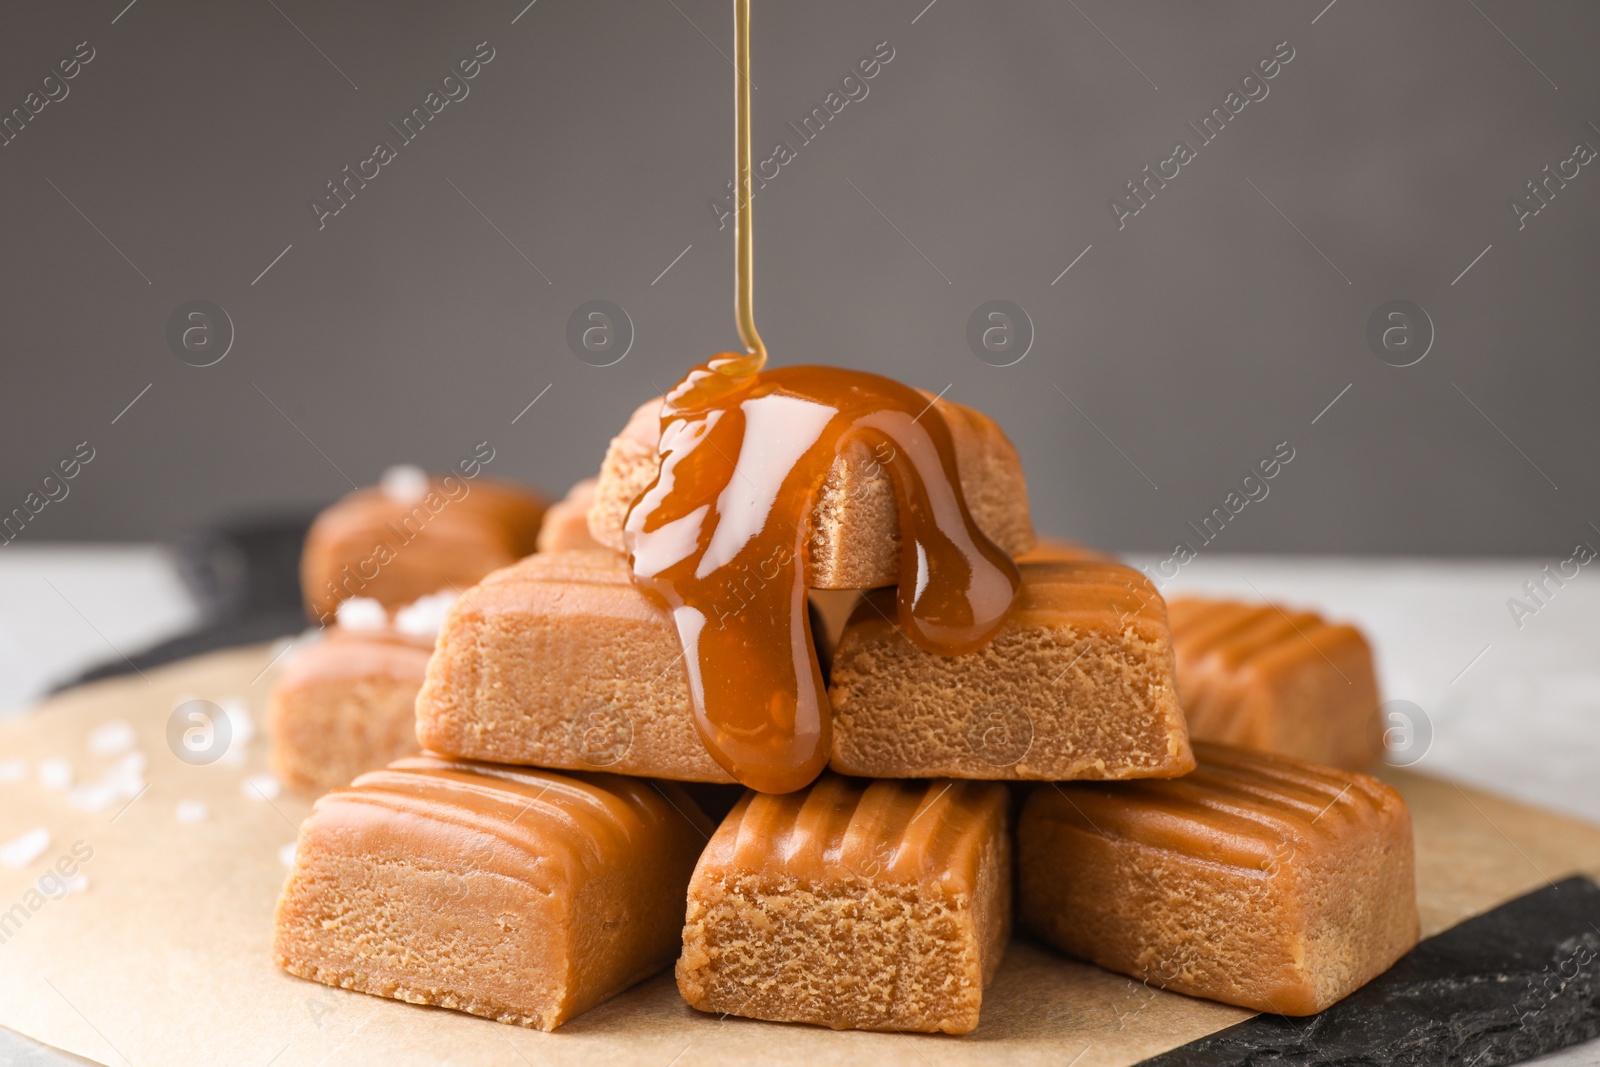 Photo of Pouring salted caramel on candies, closeup view